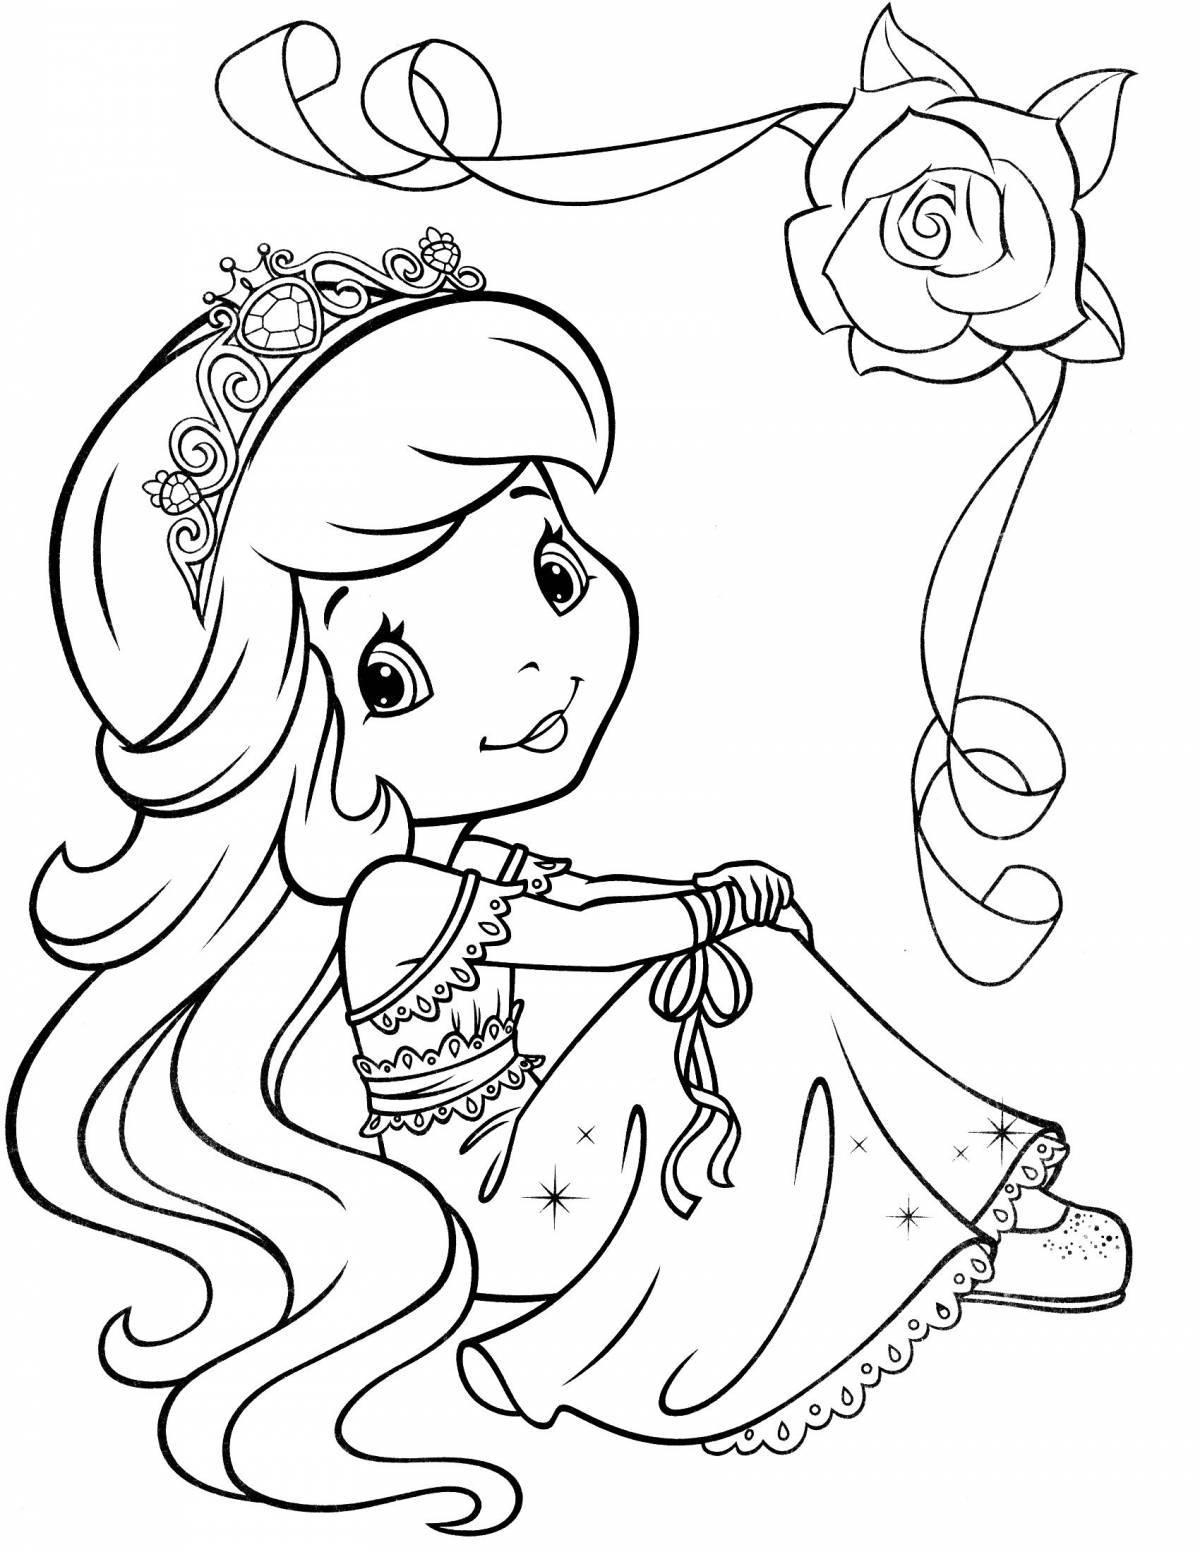 Dazzling coloring book for girls